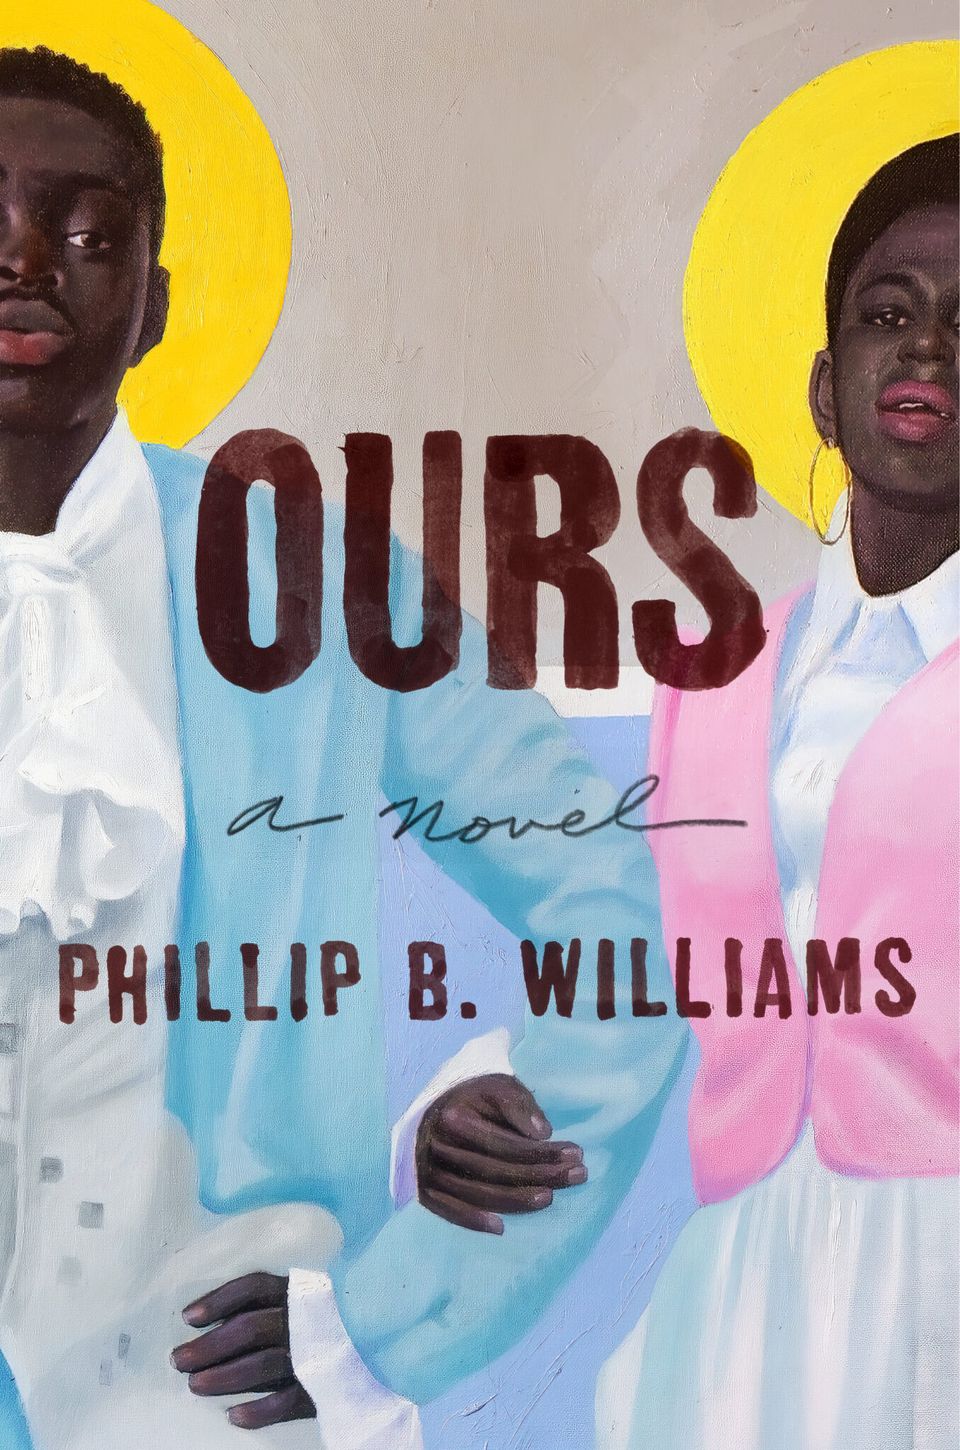 Cover for "Ours" by Phillip B. Williams designed by Lynn Buckley, with art by Damilola Opedun